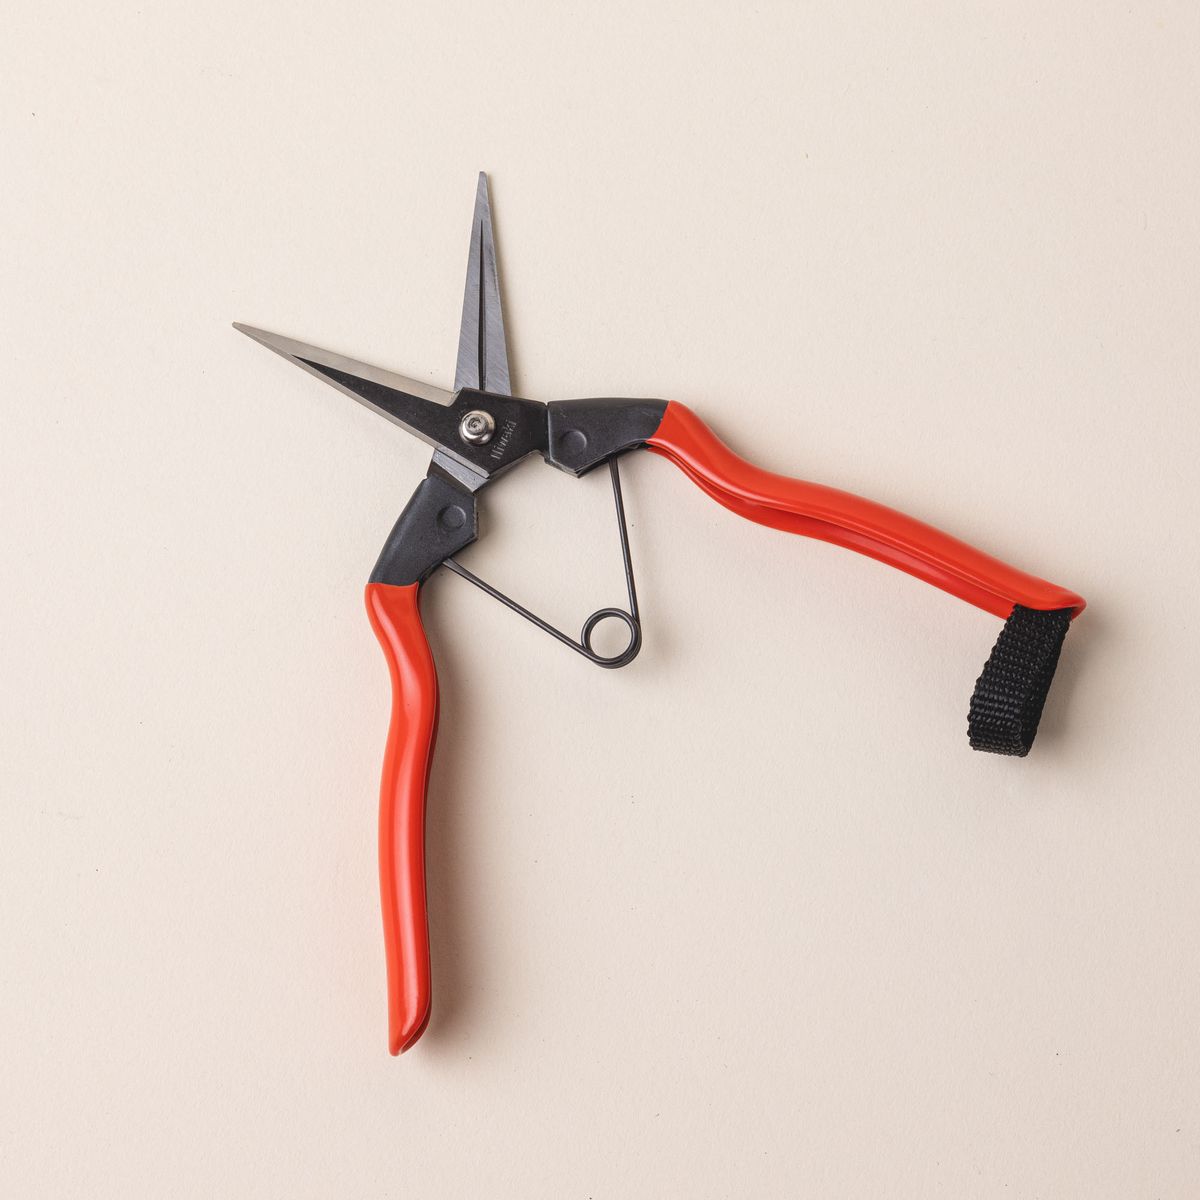 A pair of garden snips with an orange handle and narrow short blades